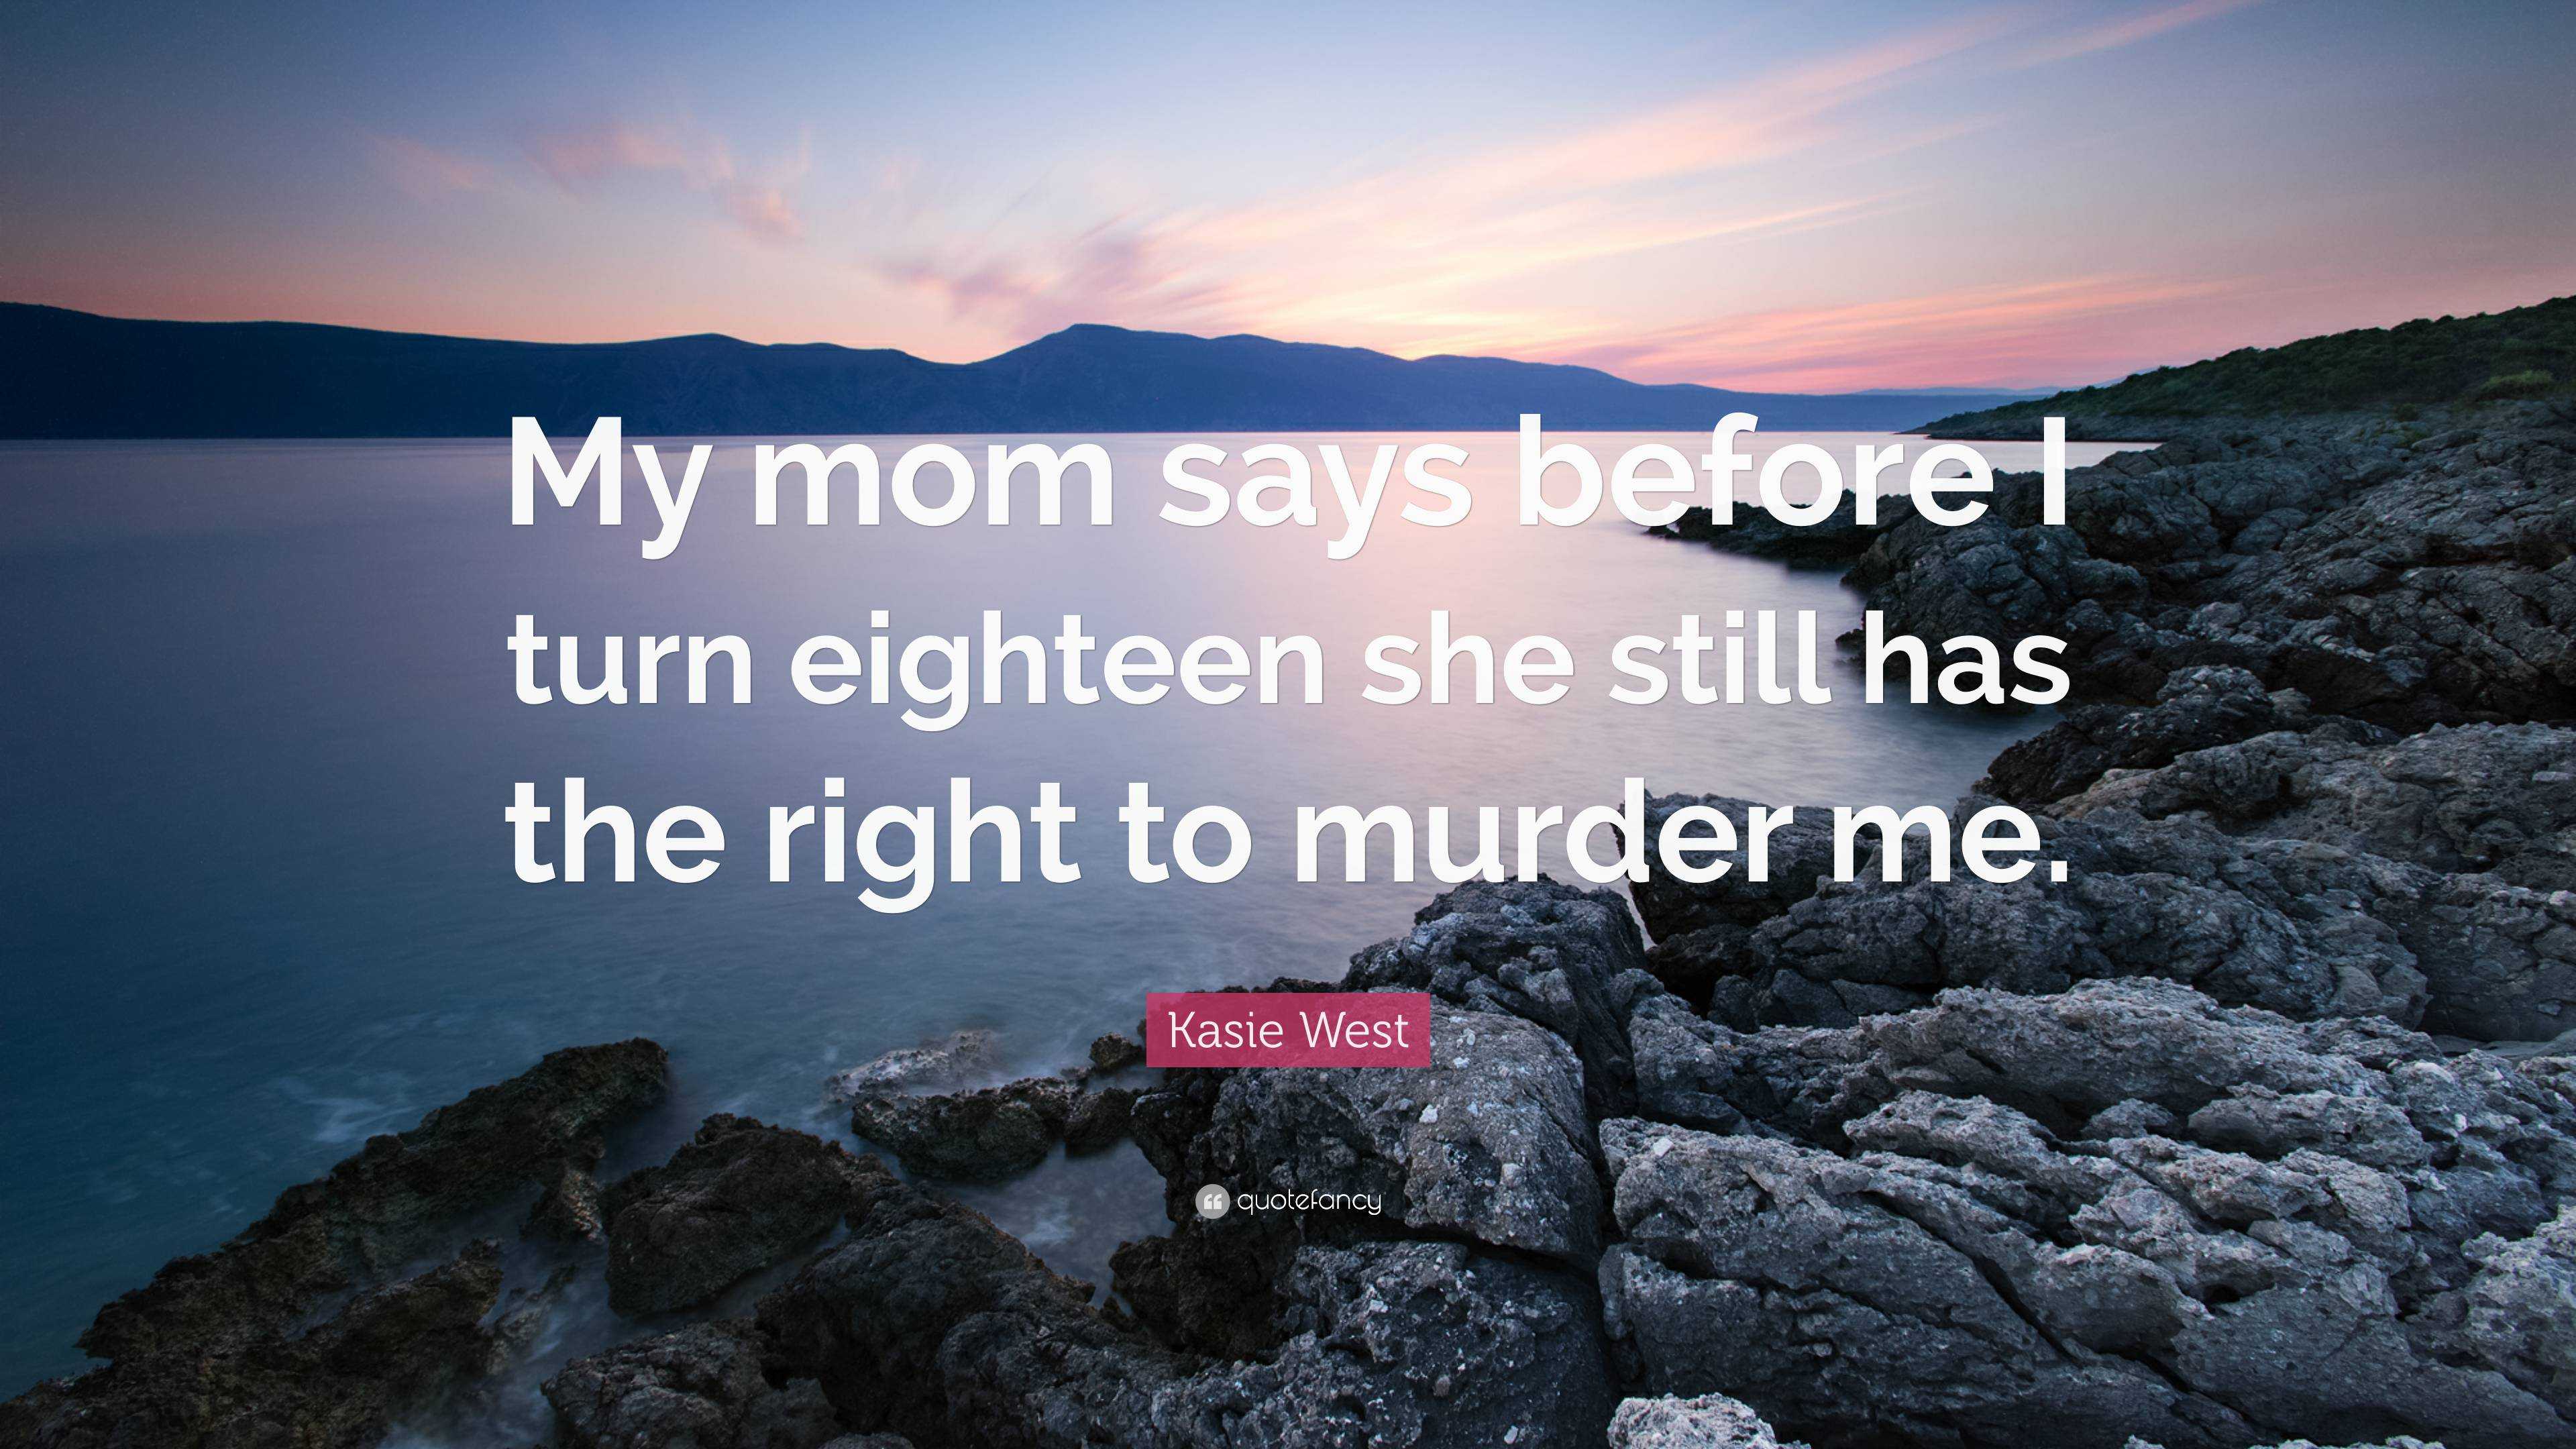 Kasie West Quote: “My mom says before I turn eighteen she still has the  right to